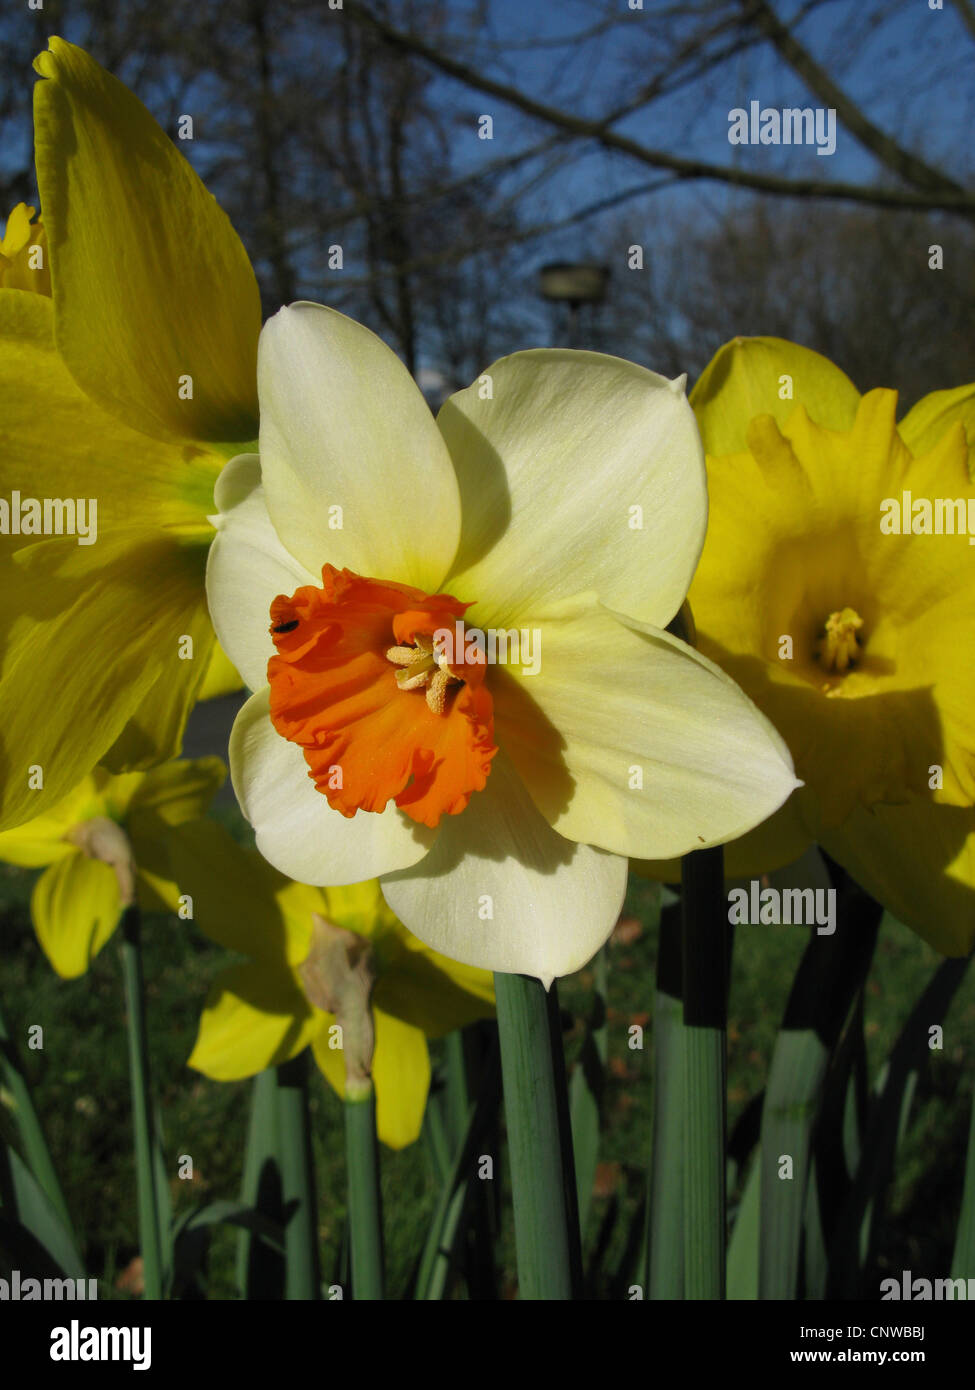 daffodil (Narcissus Barret Browning, Narcissus 'Barret Browning'), small-cup Dafodill, cultivar Barret Browning Stock Photo